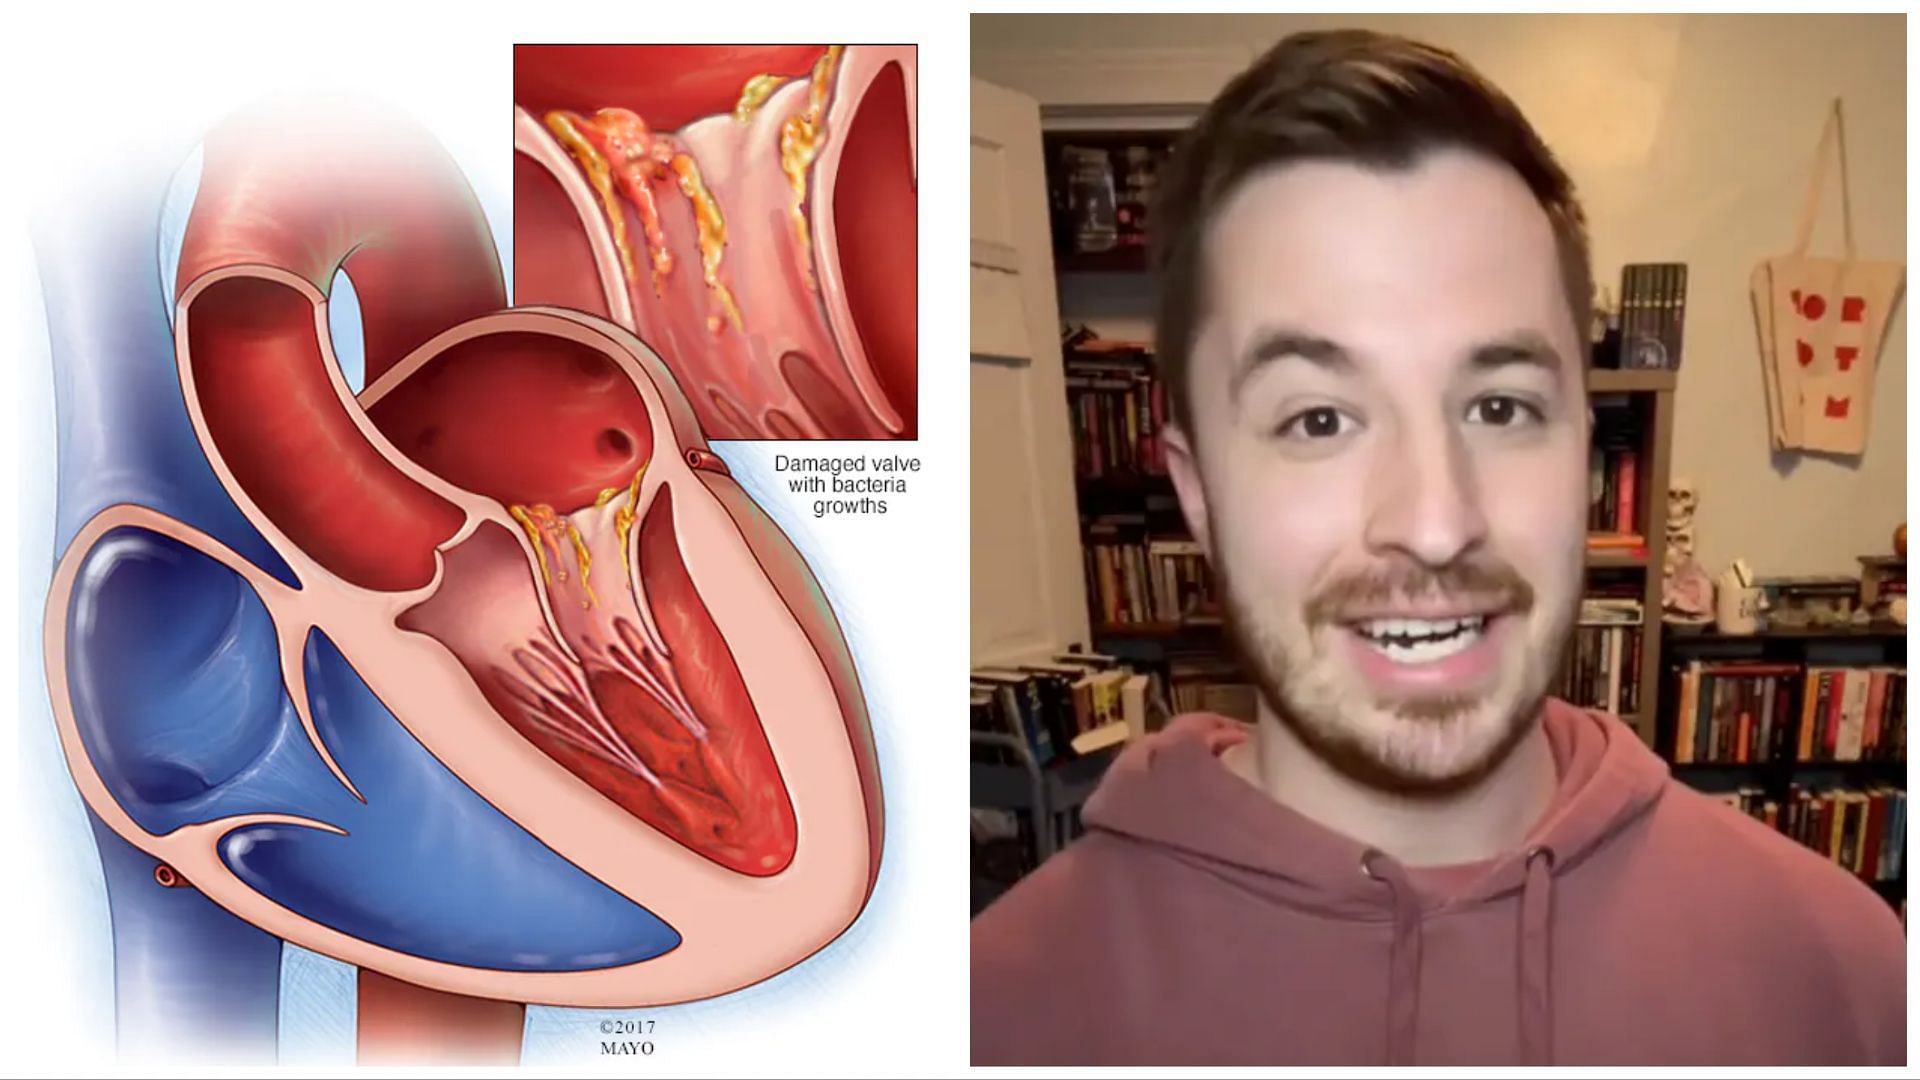 Brandon Baker was diagnosed with Bacterial Endocarditis (Image via Mayo clinic / Tiktok / @baker.reads)